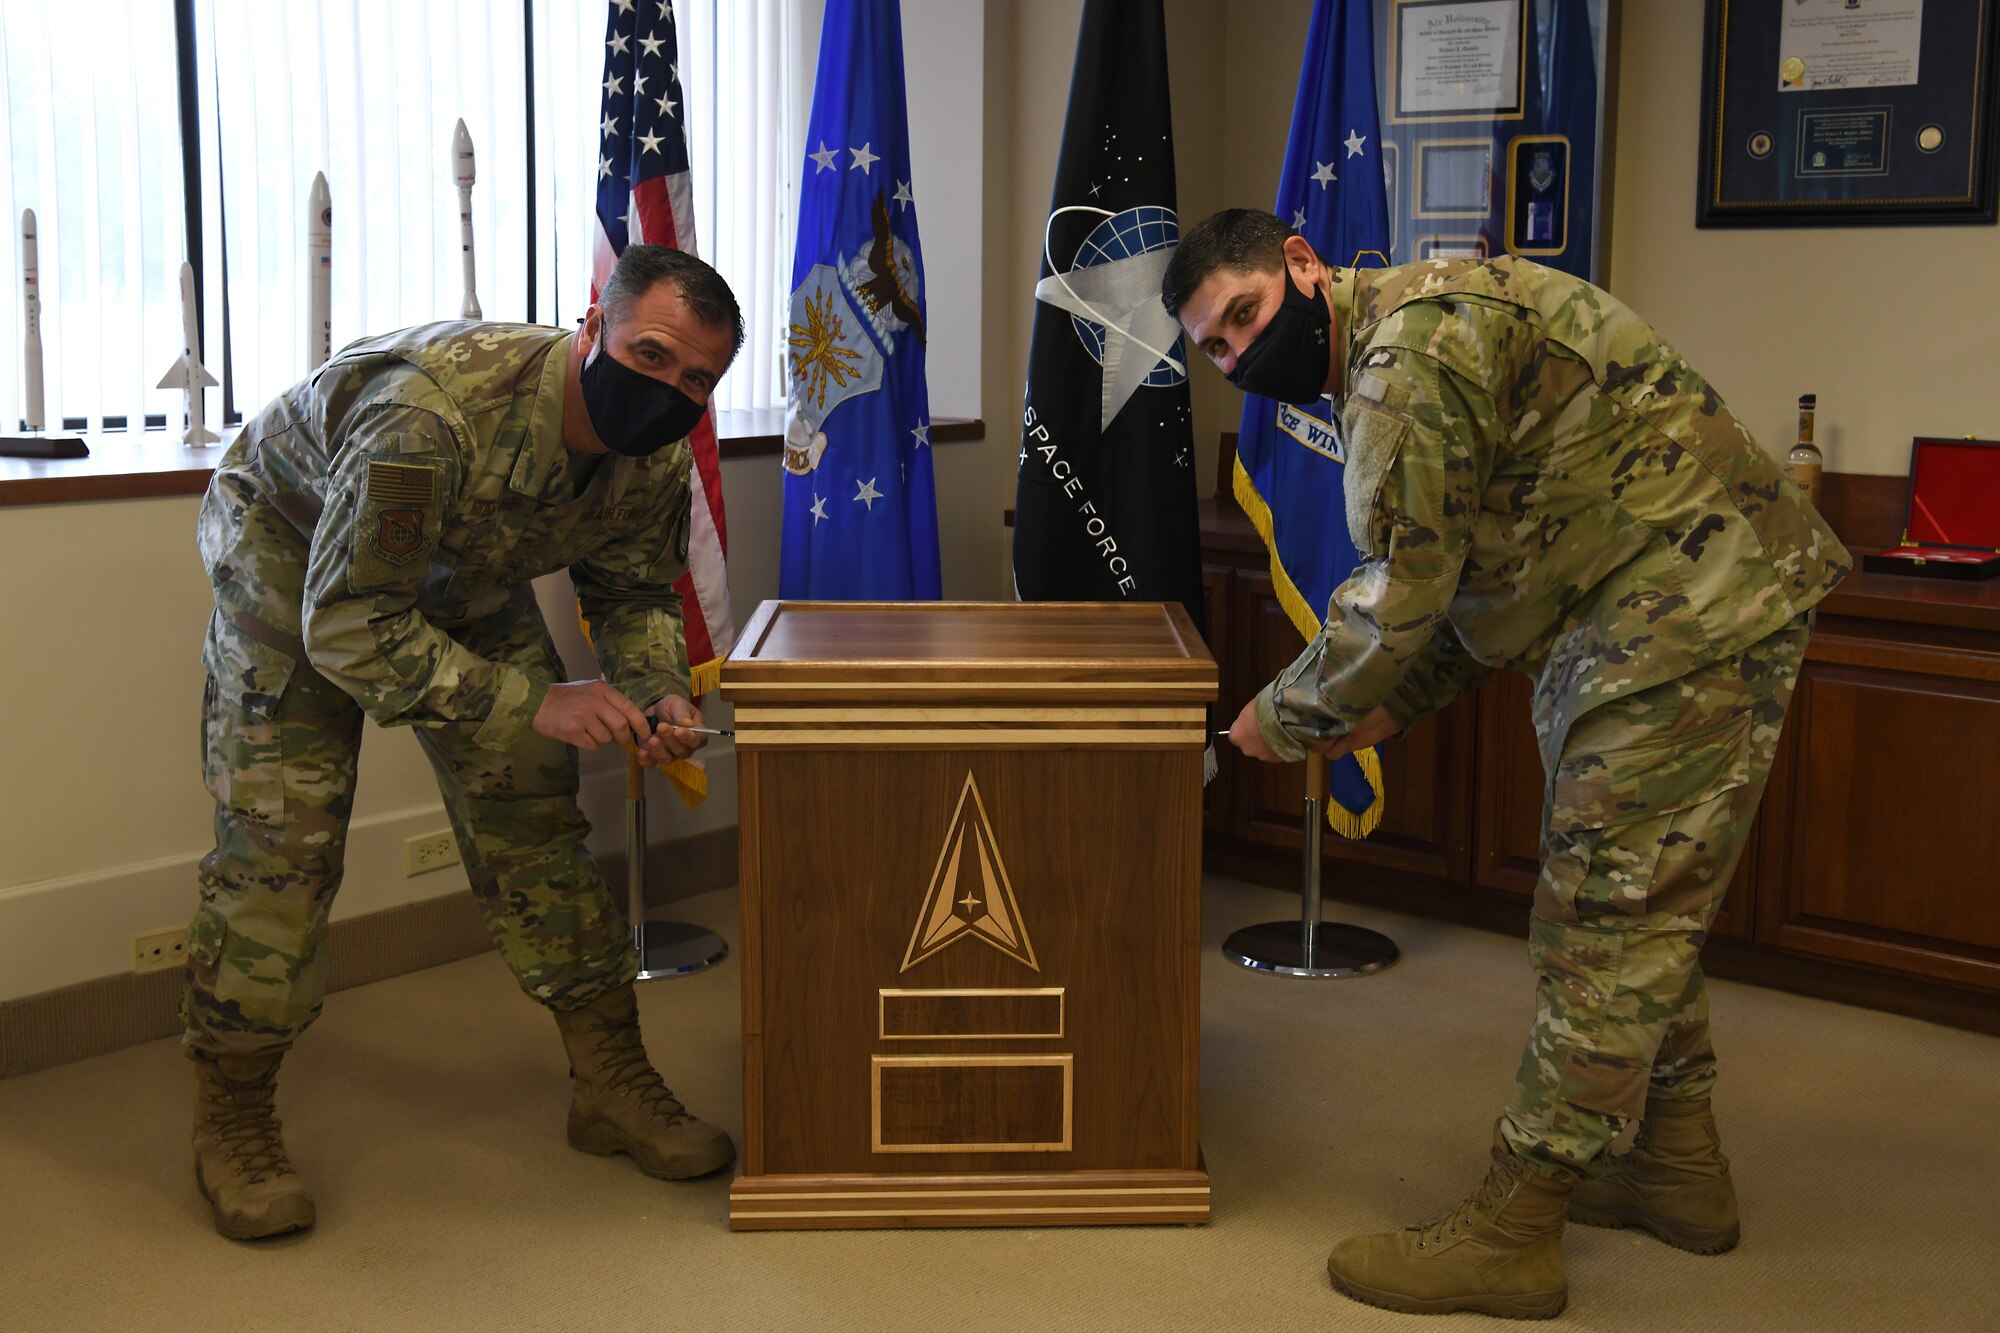 Col. Anthony Mastalir, 30th Space Wing commander, and Chief Master Sgt. Jason DeLucy, 30th SW command chief, close the 30th Space Wing 2020 time capsule in celebration of the one year anniversary of the U.S. Space Force Dec. 17, 2020, at Vandenberg Air Force Base, Calif.